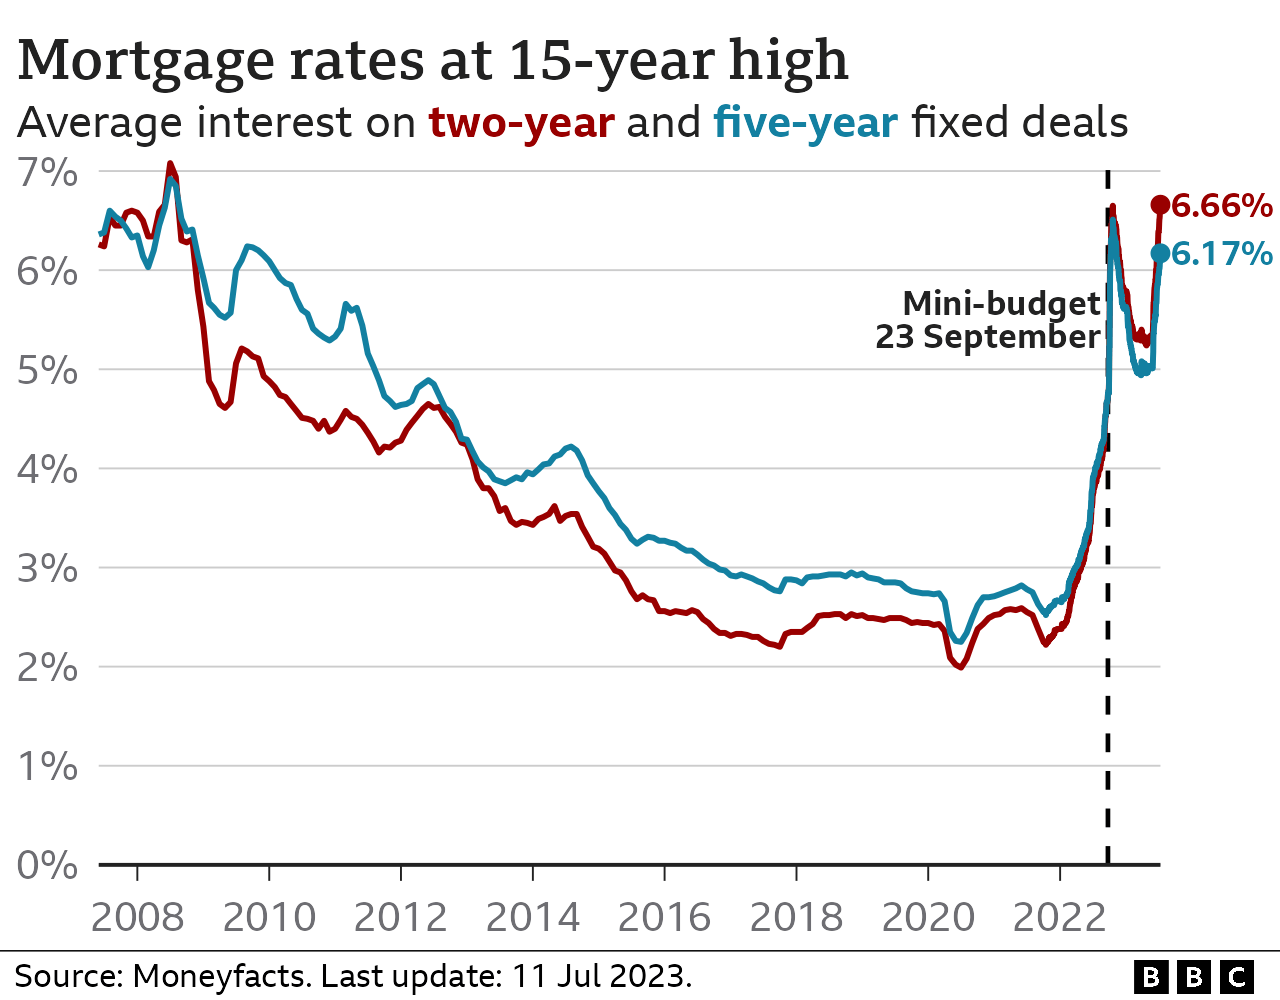 Line chart showing the average interest rate charged on two-year and five-year fixed deals. On 11 July 2023, the two-year rates were 6.66%, higher than any point since August 2008. The five-year rate was 6.17%.